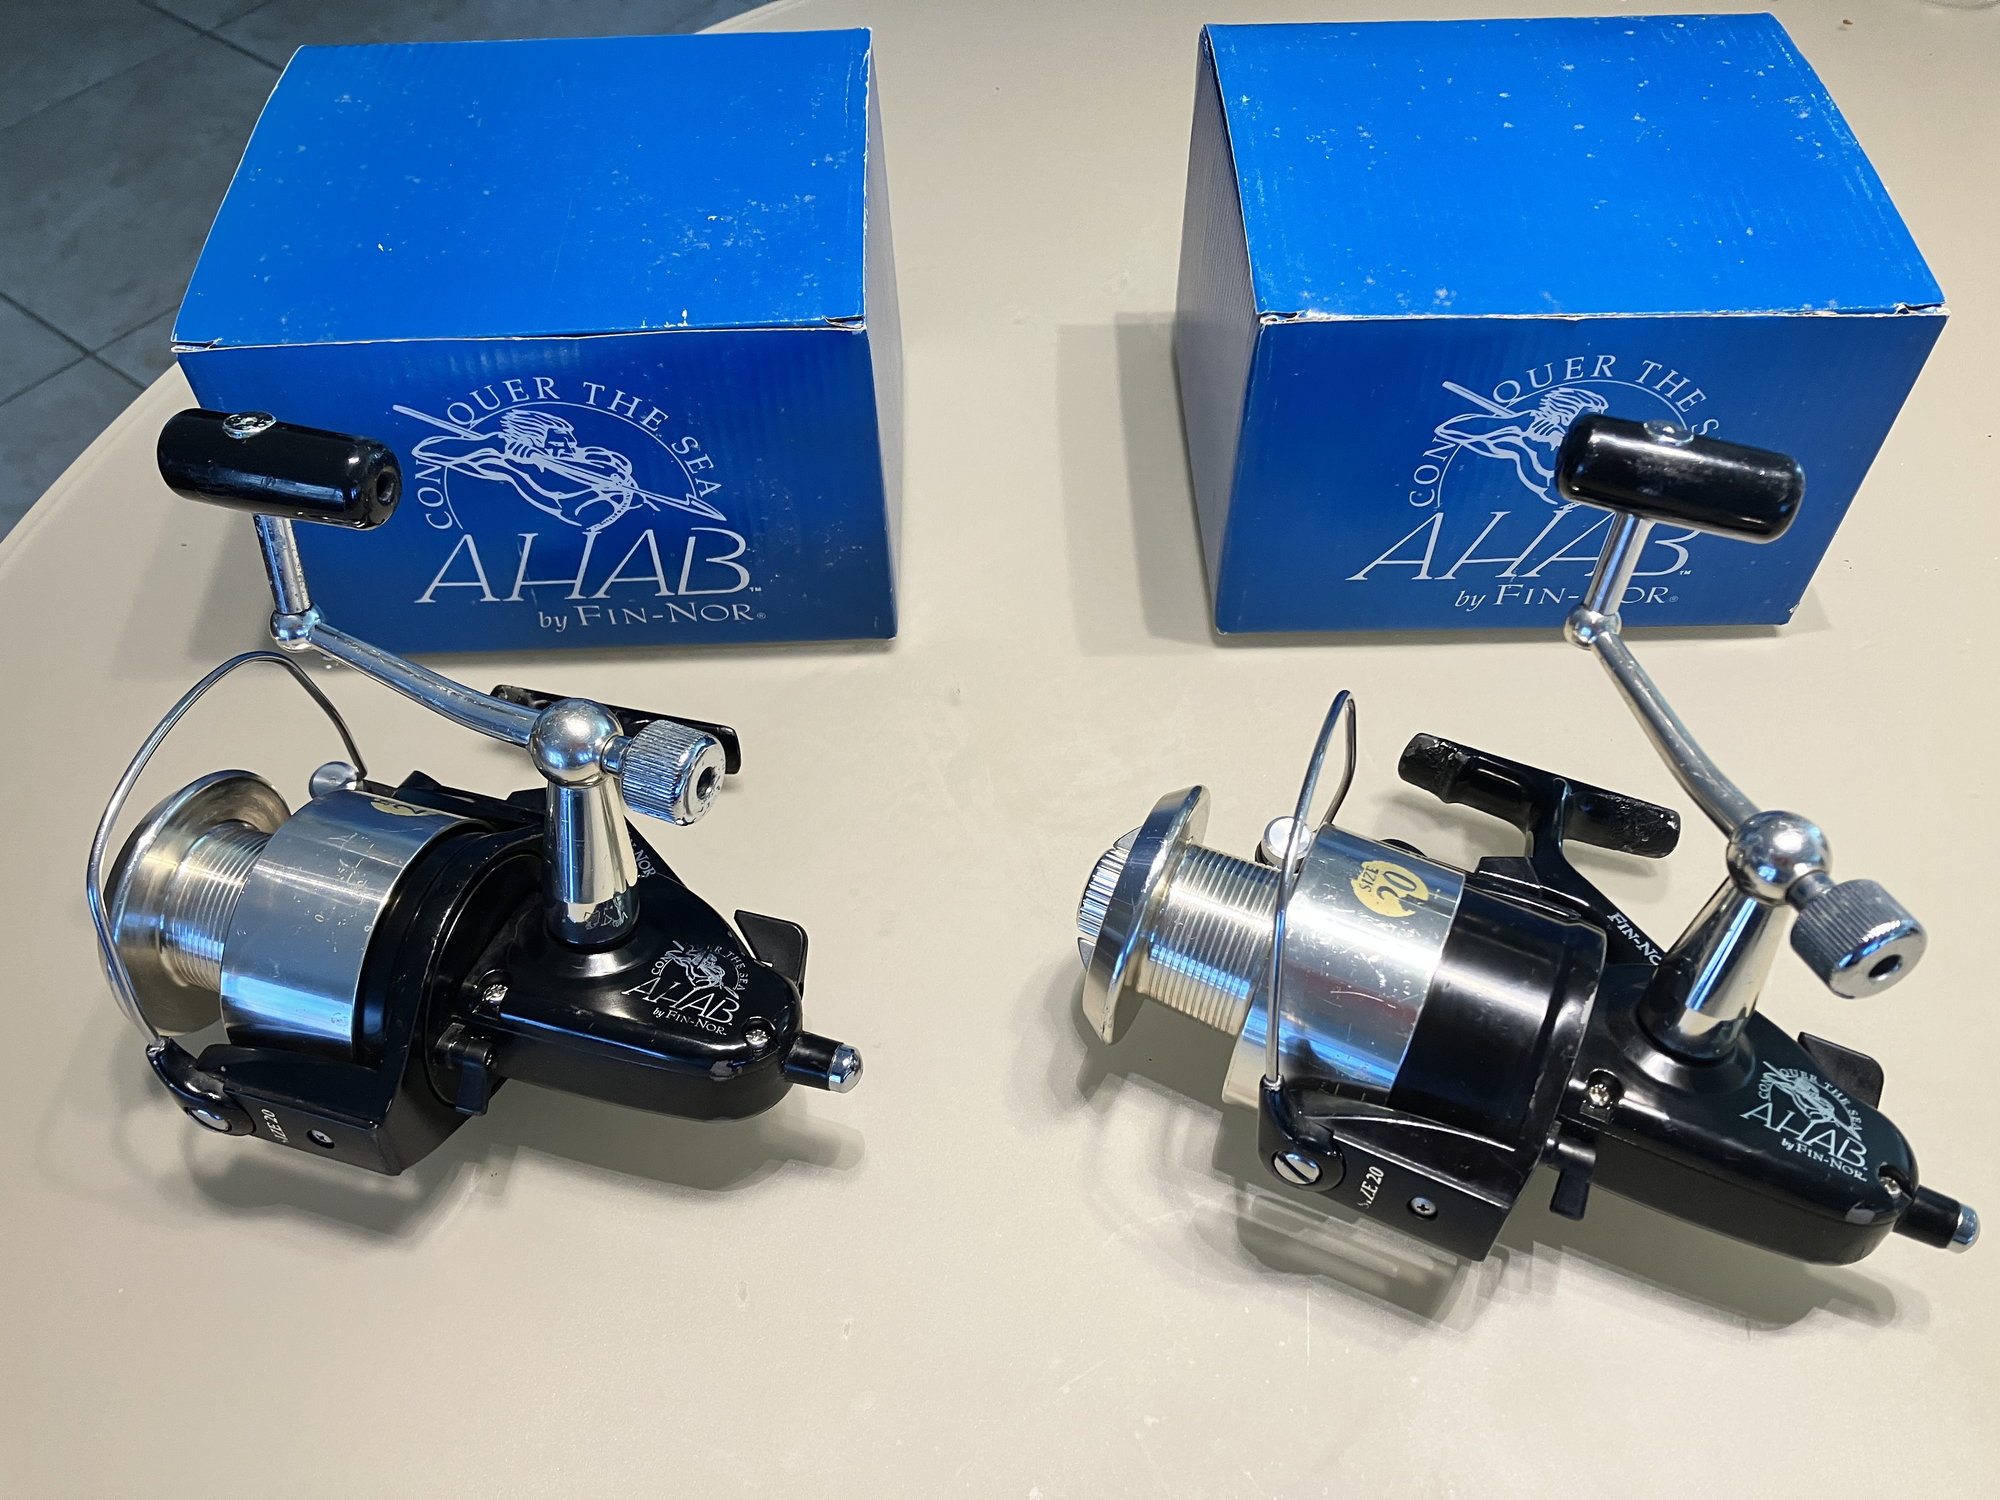 Fin-Nor Ahab 20 spinning reels and rods with original boxes. - The Hull  Truth - Boating and Fishing Forum